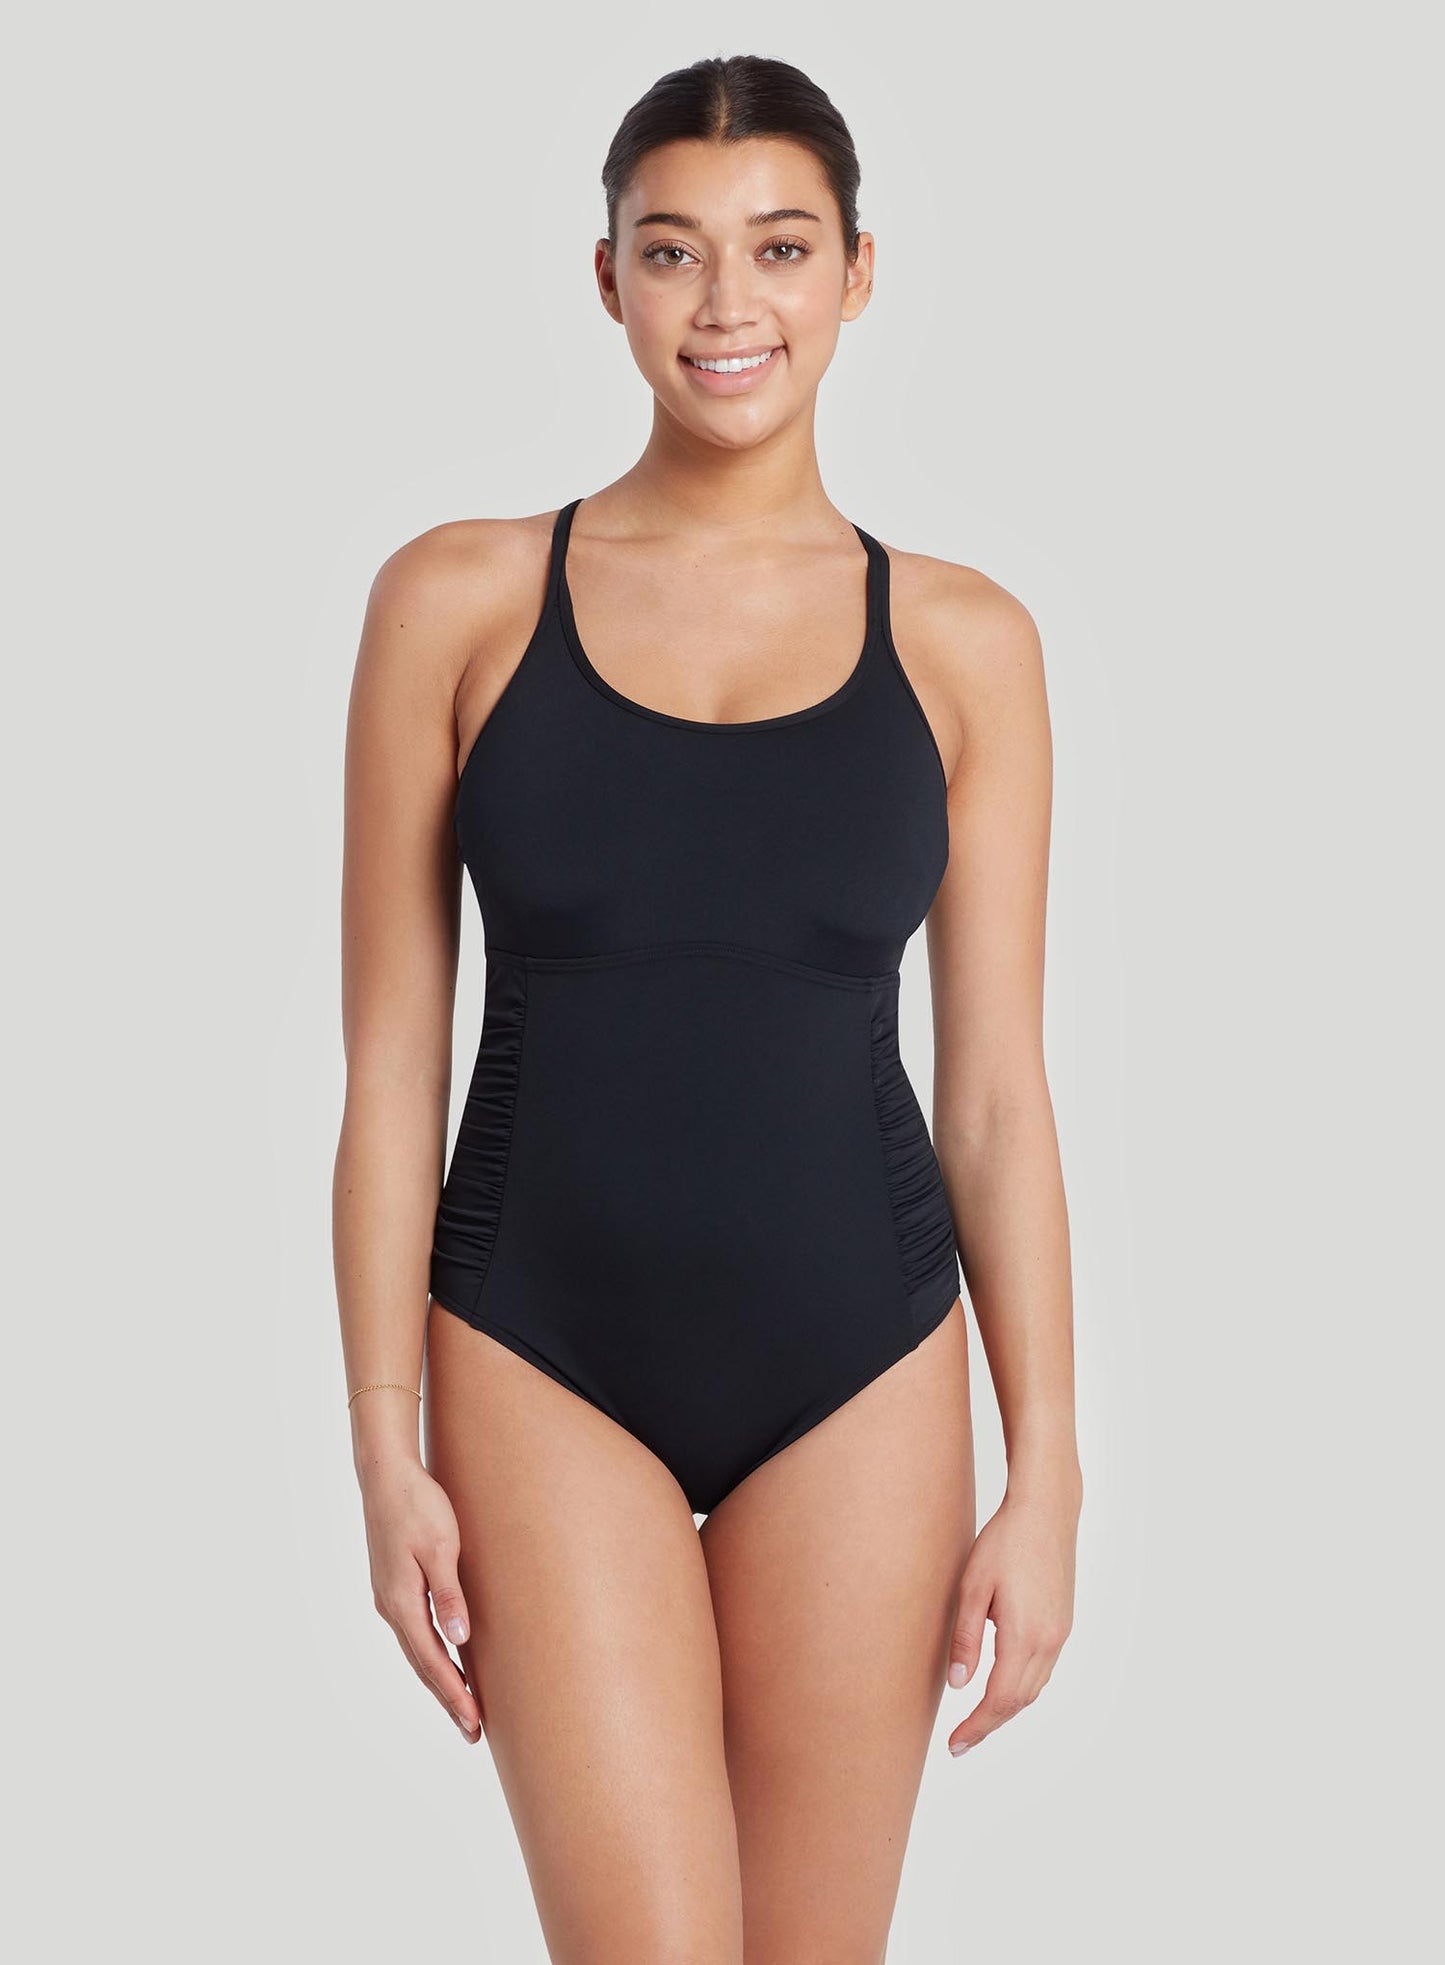 Buy Zoggs Black Marley Scoopback One Piece Swimsuit from Next Canada